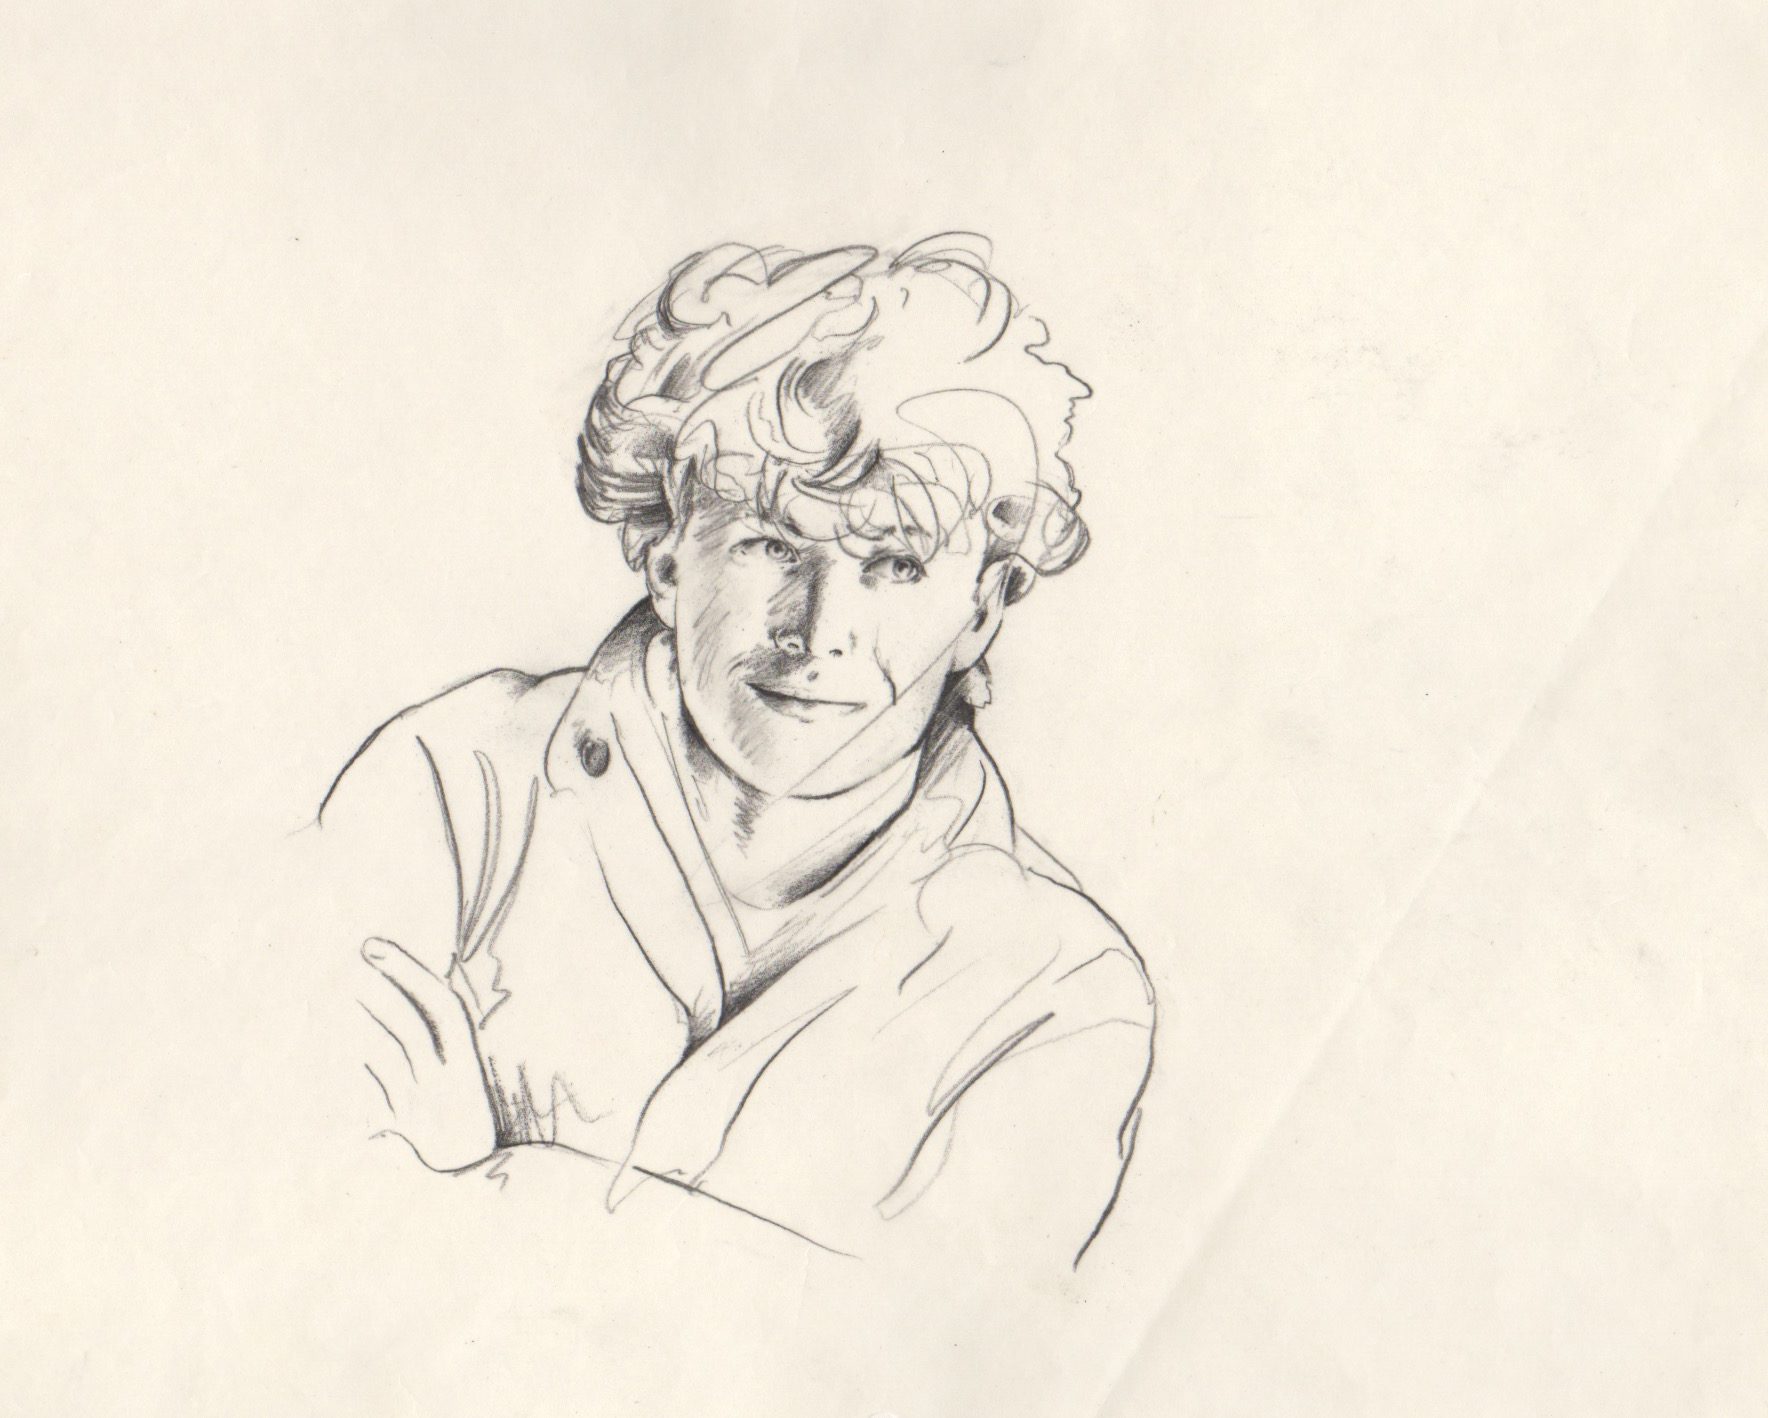 99. [Synth-Pop]: [A-HA]. PATTERSON, Michael (Artist). [Original Pencil Sketch/Still Utilized in Video for Take on Me] Image